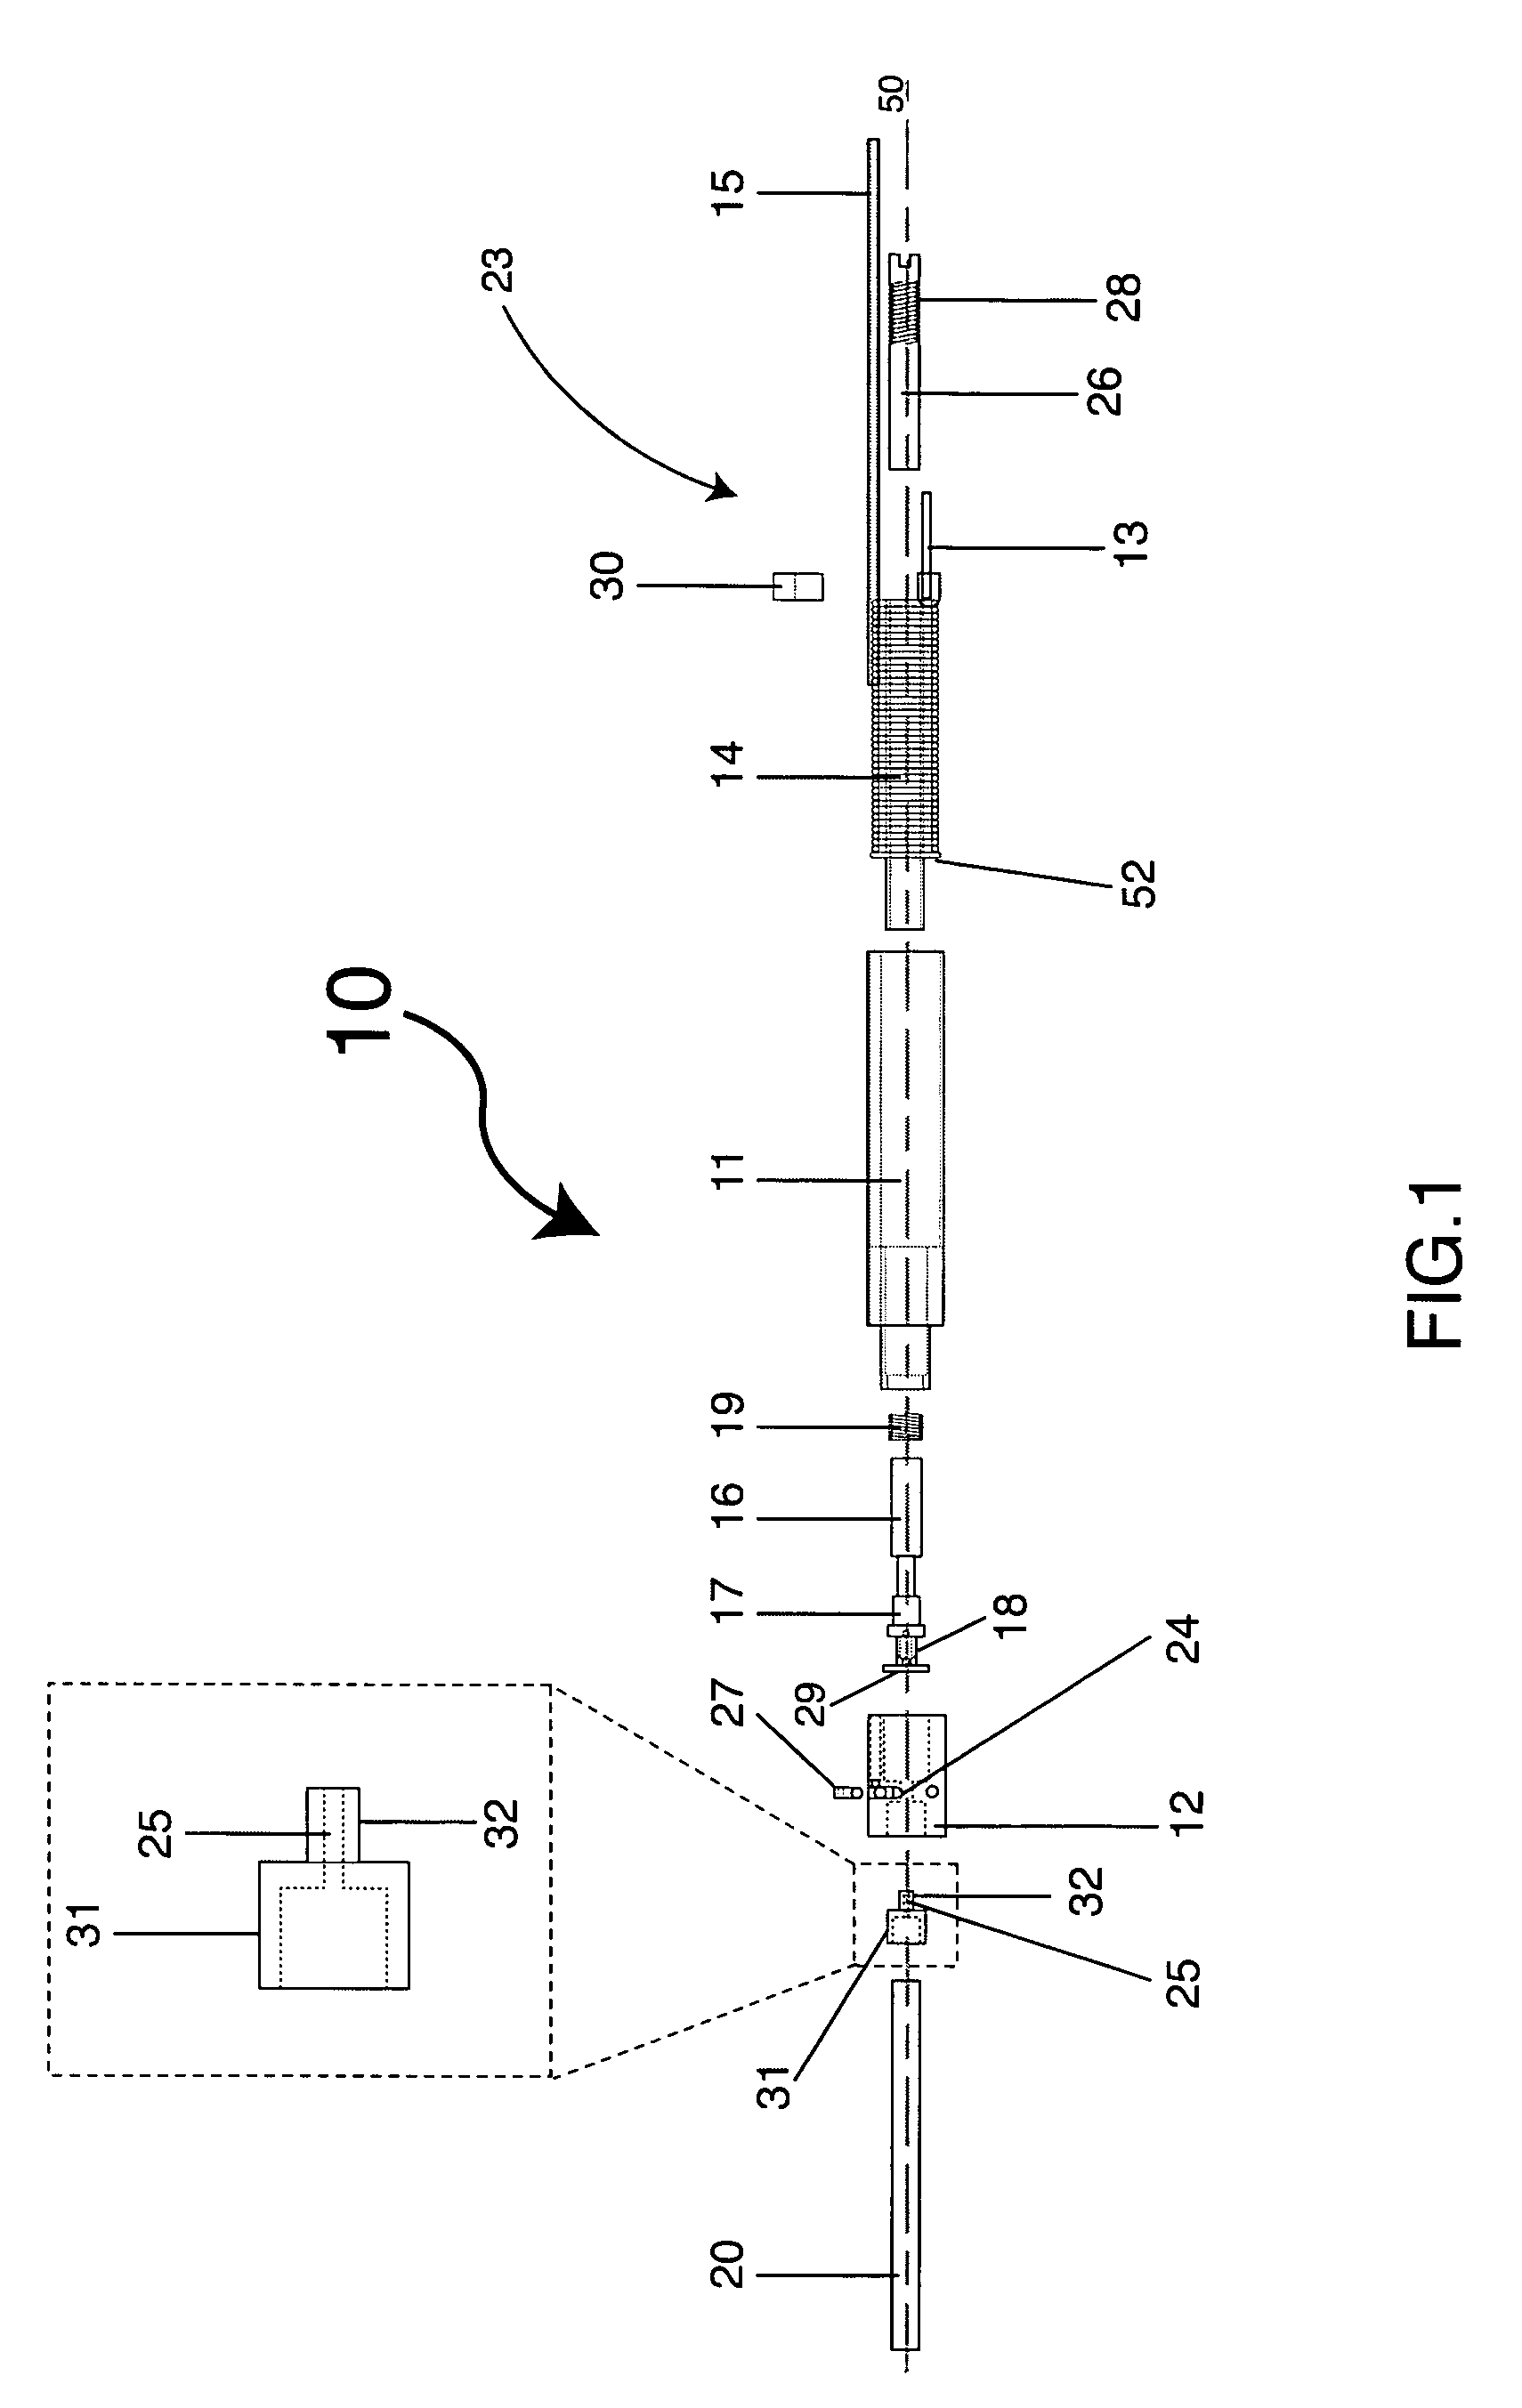 Rear feed micro-fluidic two-way isolation valve